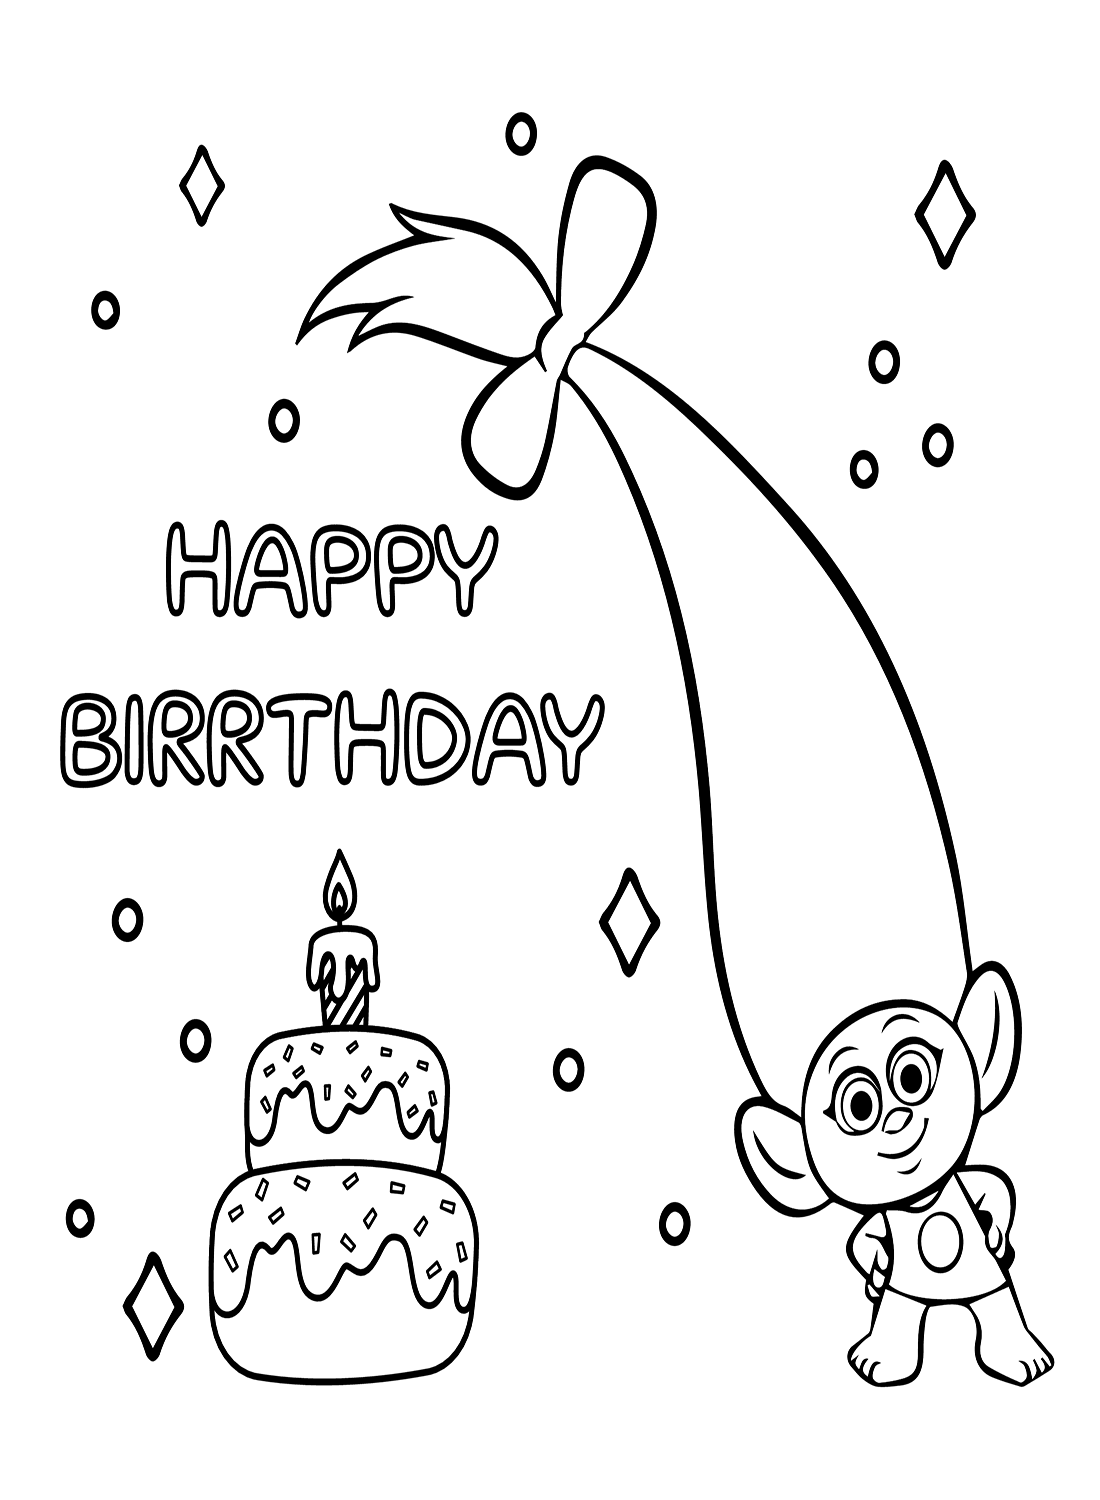 Trolls World Tour Images Coloring Pages